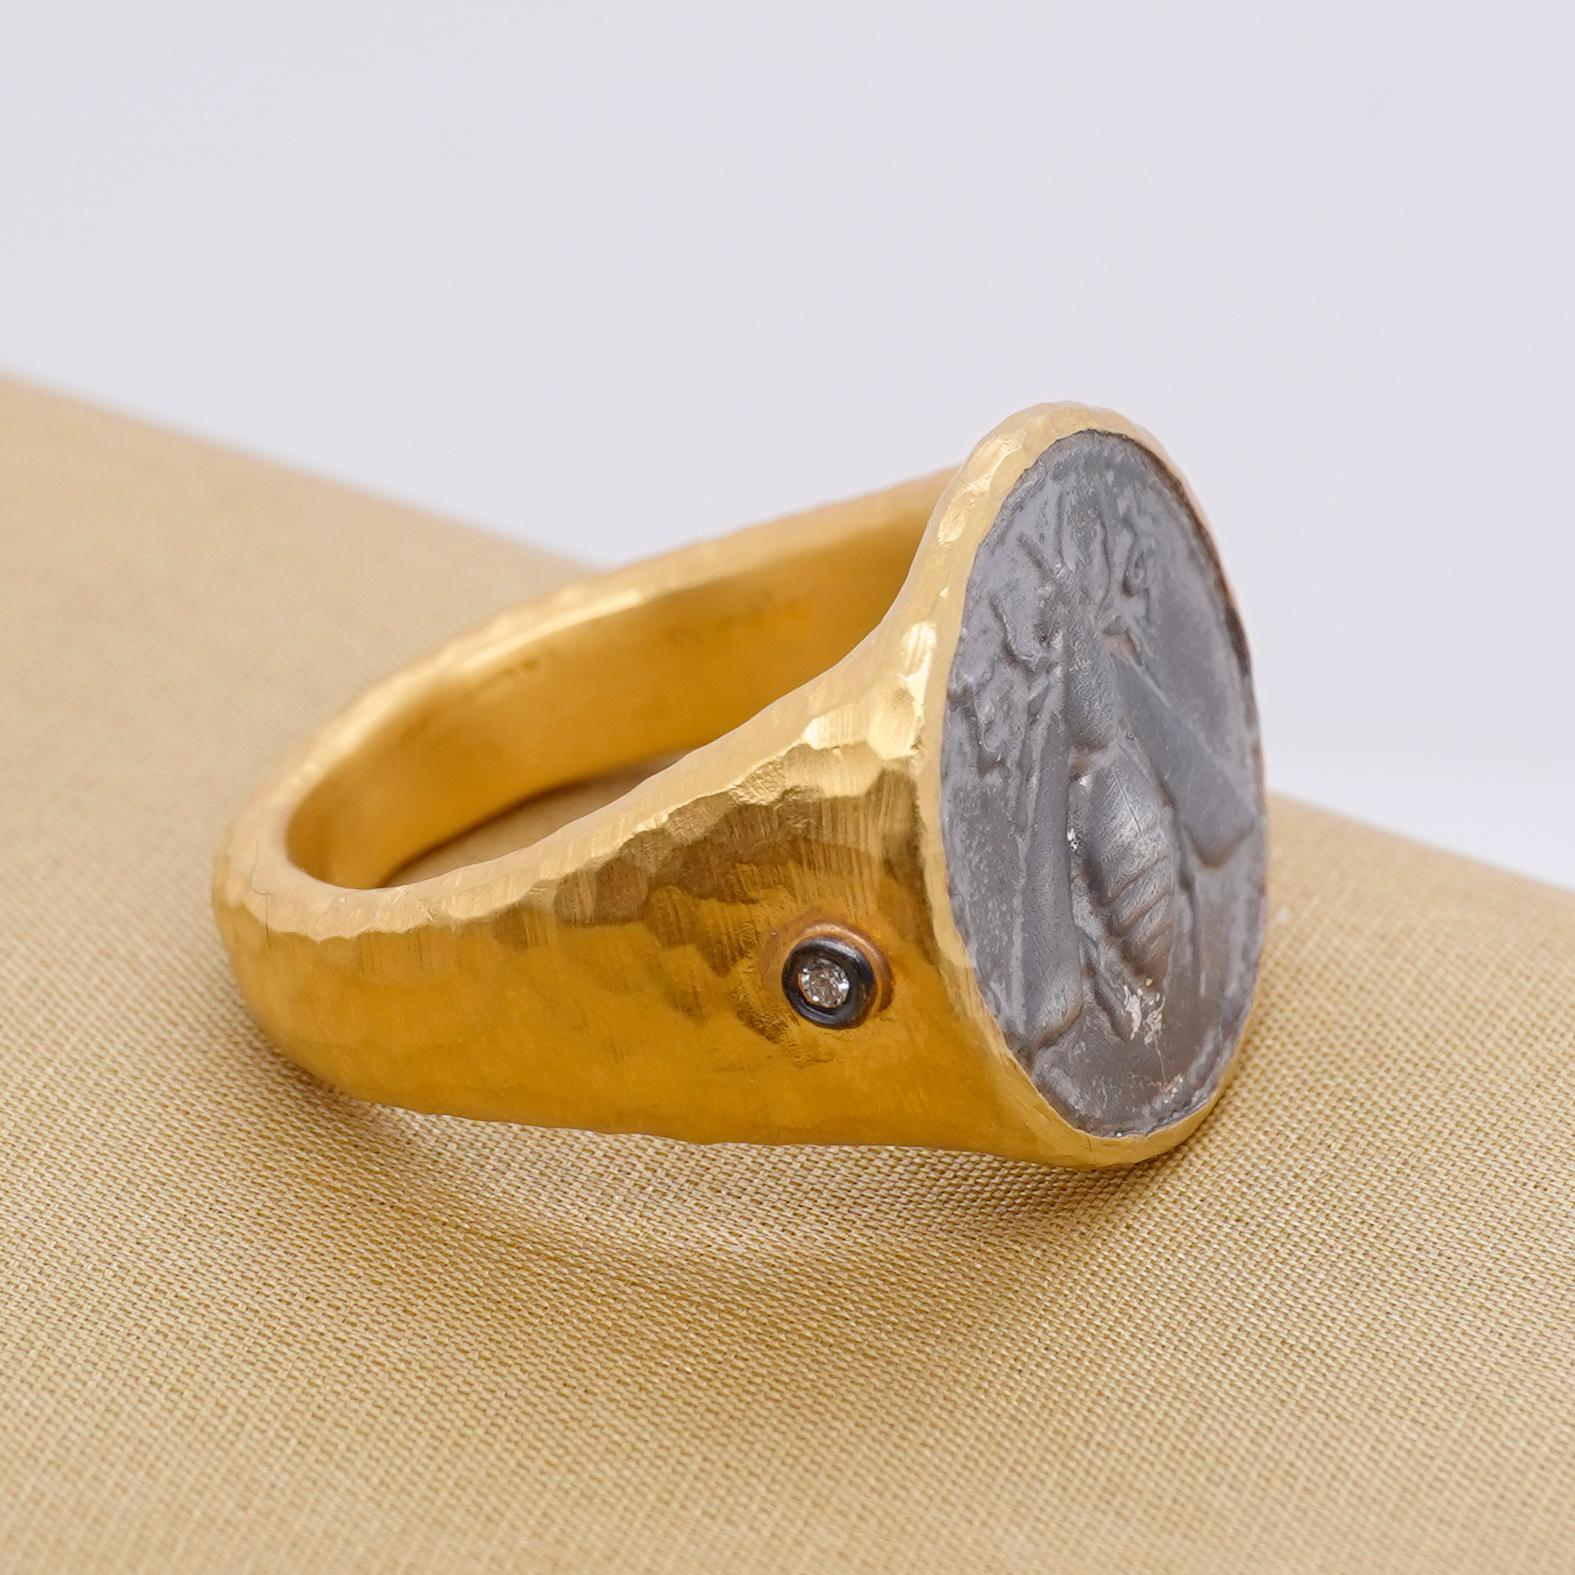 Ancient Bee Coin Ring w/ Diamonds, Hammered Gold, 24kt Gold & Silver by Kurtulan For Sale 1